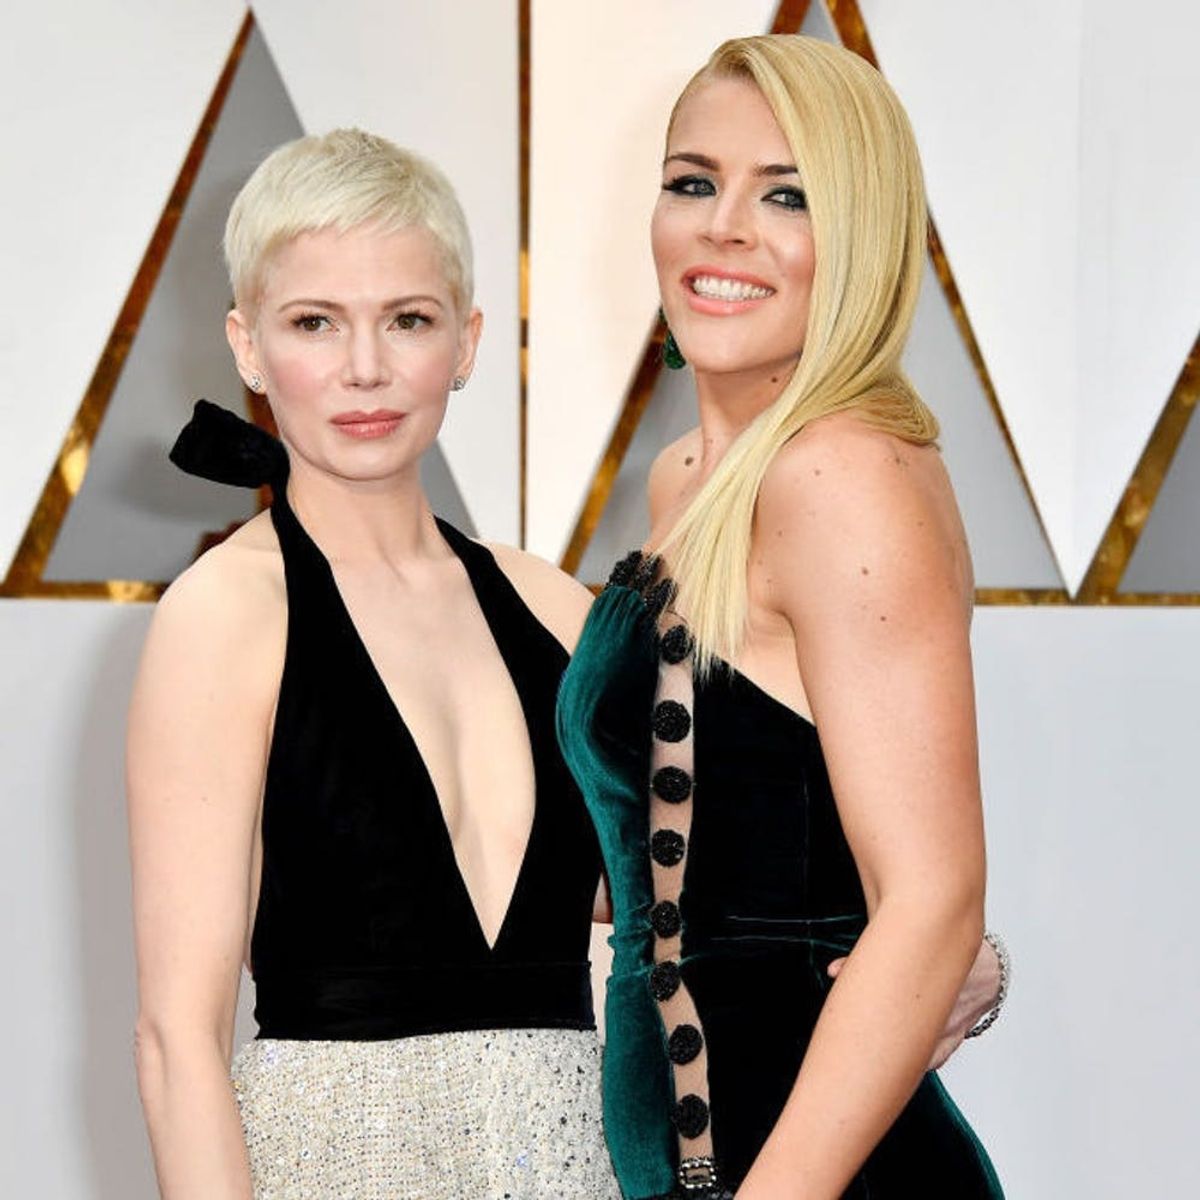 Matthew McConaughey Inspired This Joke Between BFFs Busy Philipps and Michelle Williams